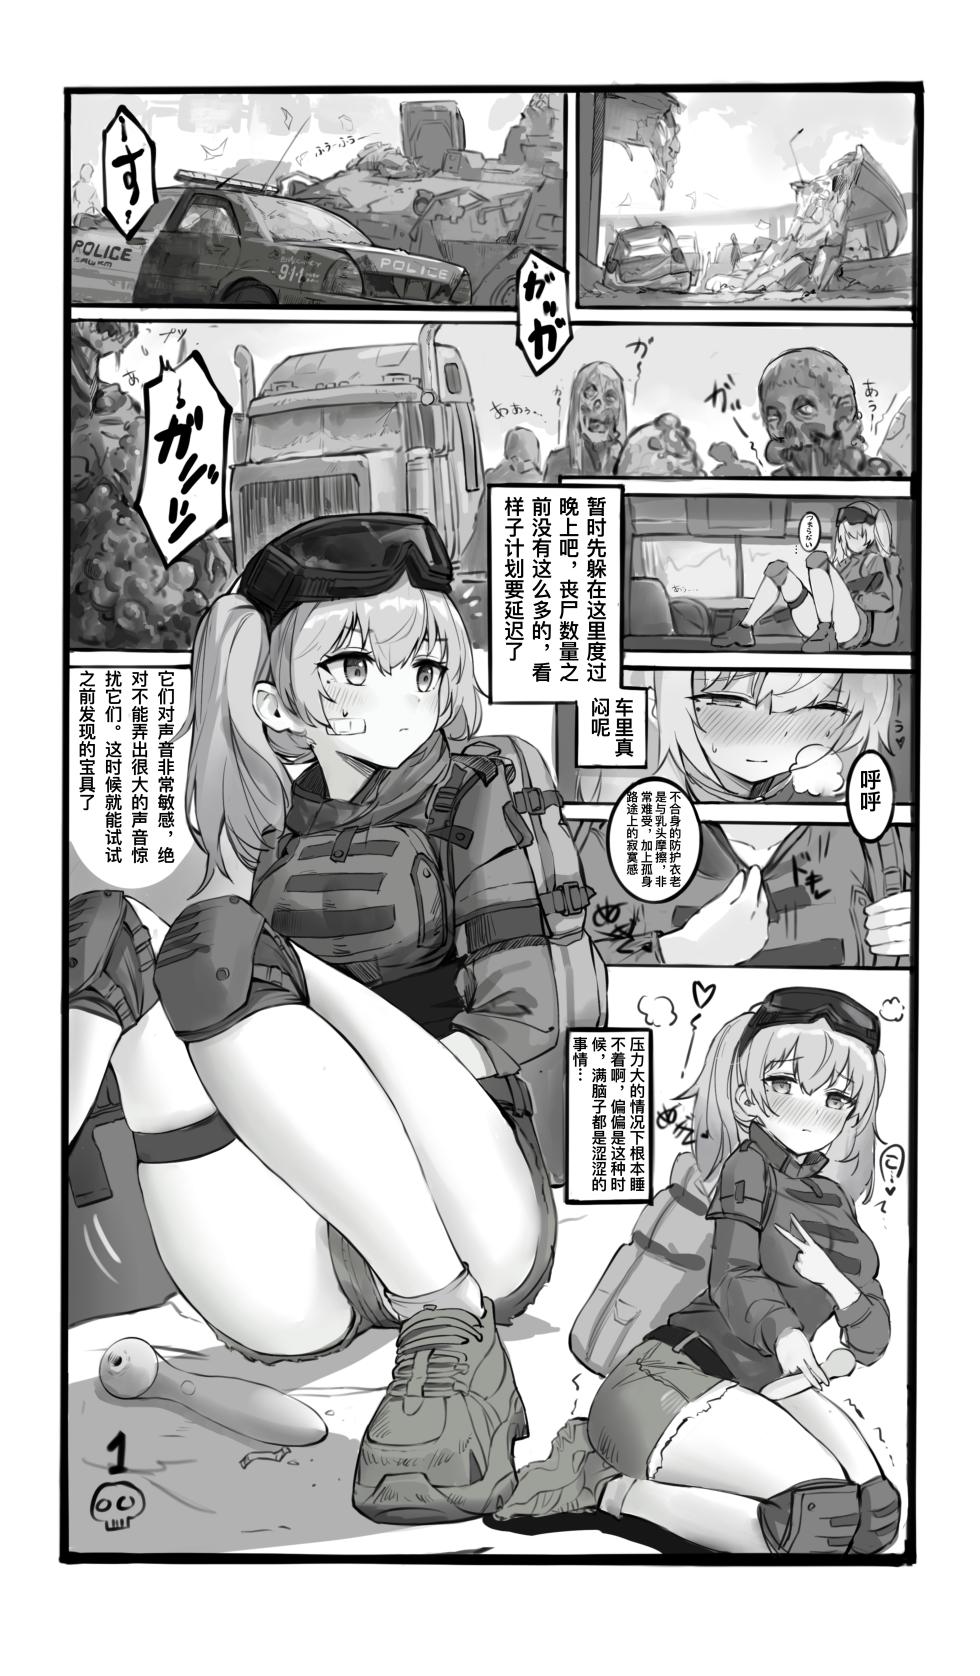 [SAWKM] 吮吸神器 Kiss Toy Polly Plus [Chinese] - Page 1